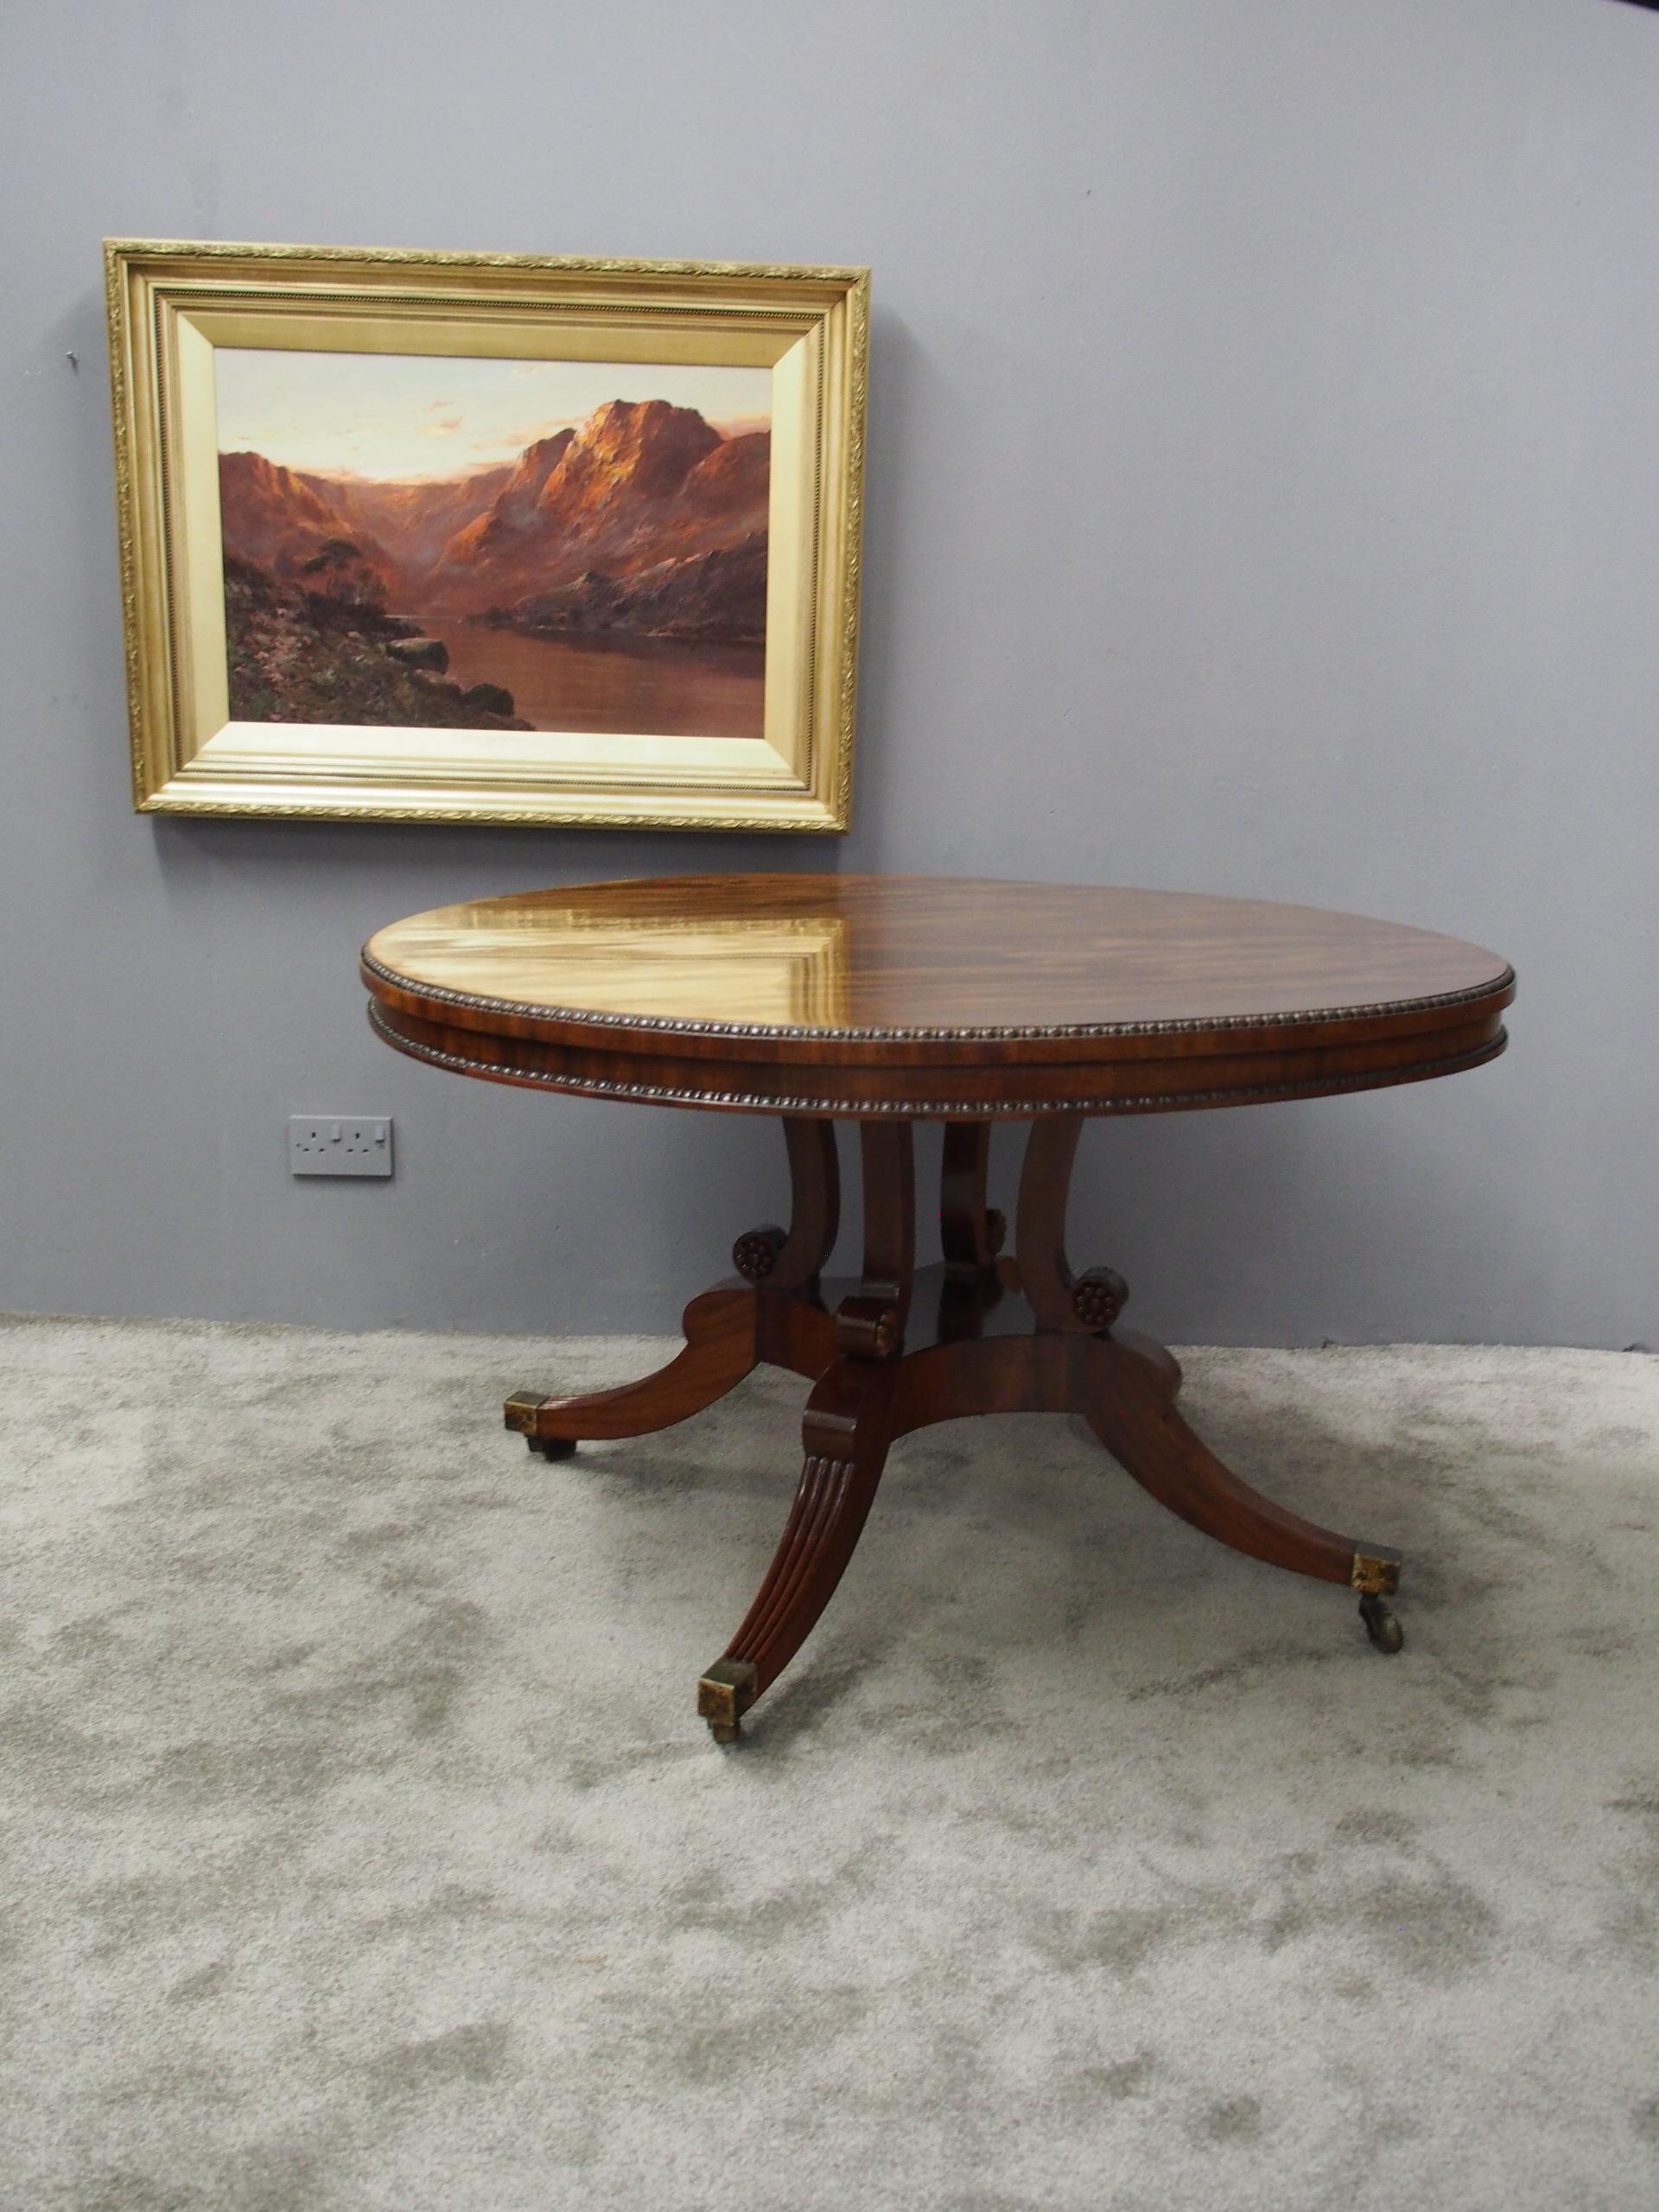 Regency mahogany breakfast table in the manner of William Trotter, Edinburgh, circa 1815. The top in flame mahogany has a beaded fore-edge and similarly beaded frieze, standing on 4 shaped uprights with carved flower heads to the sides. It stands on